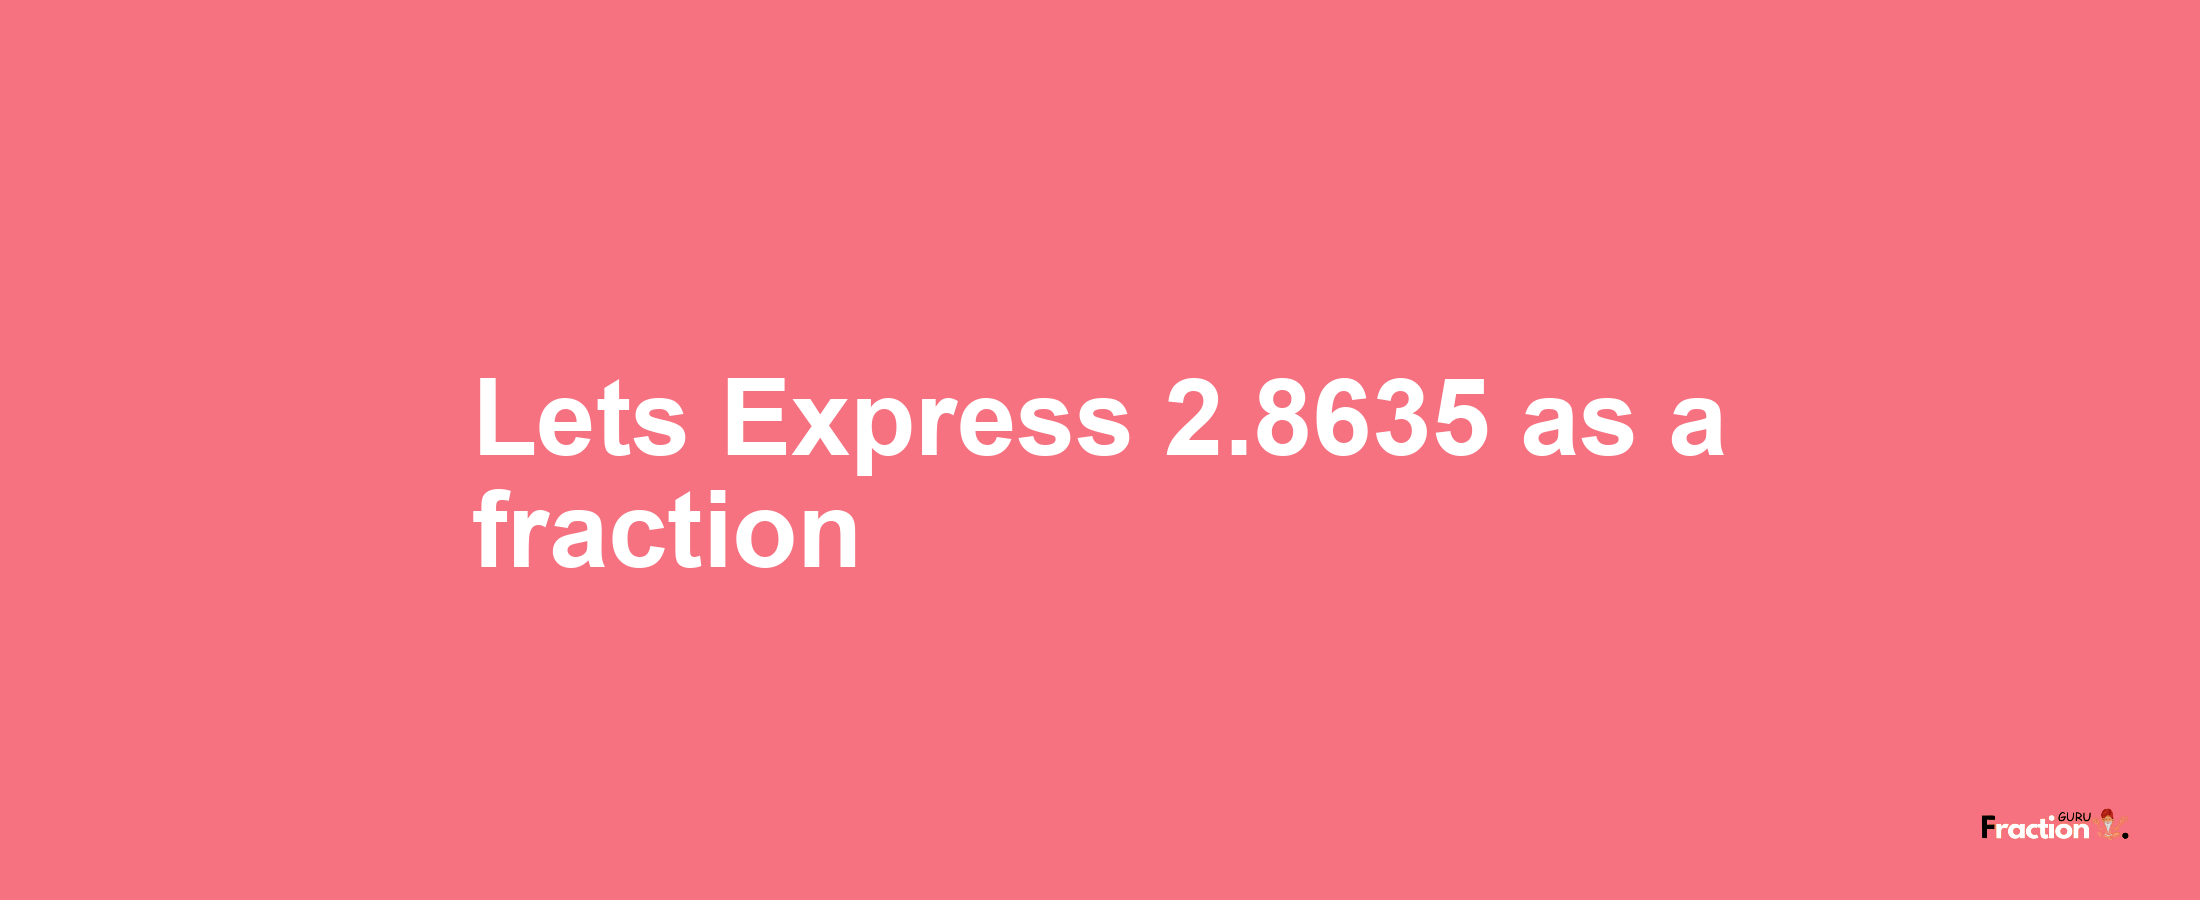 Lets Express 2.8635 as afraction